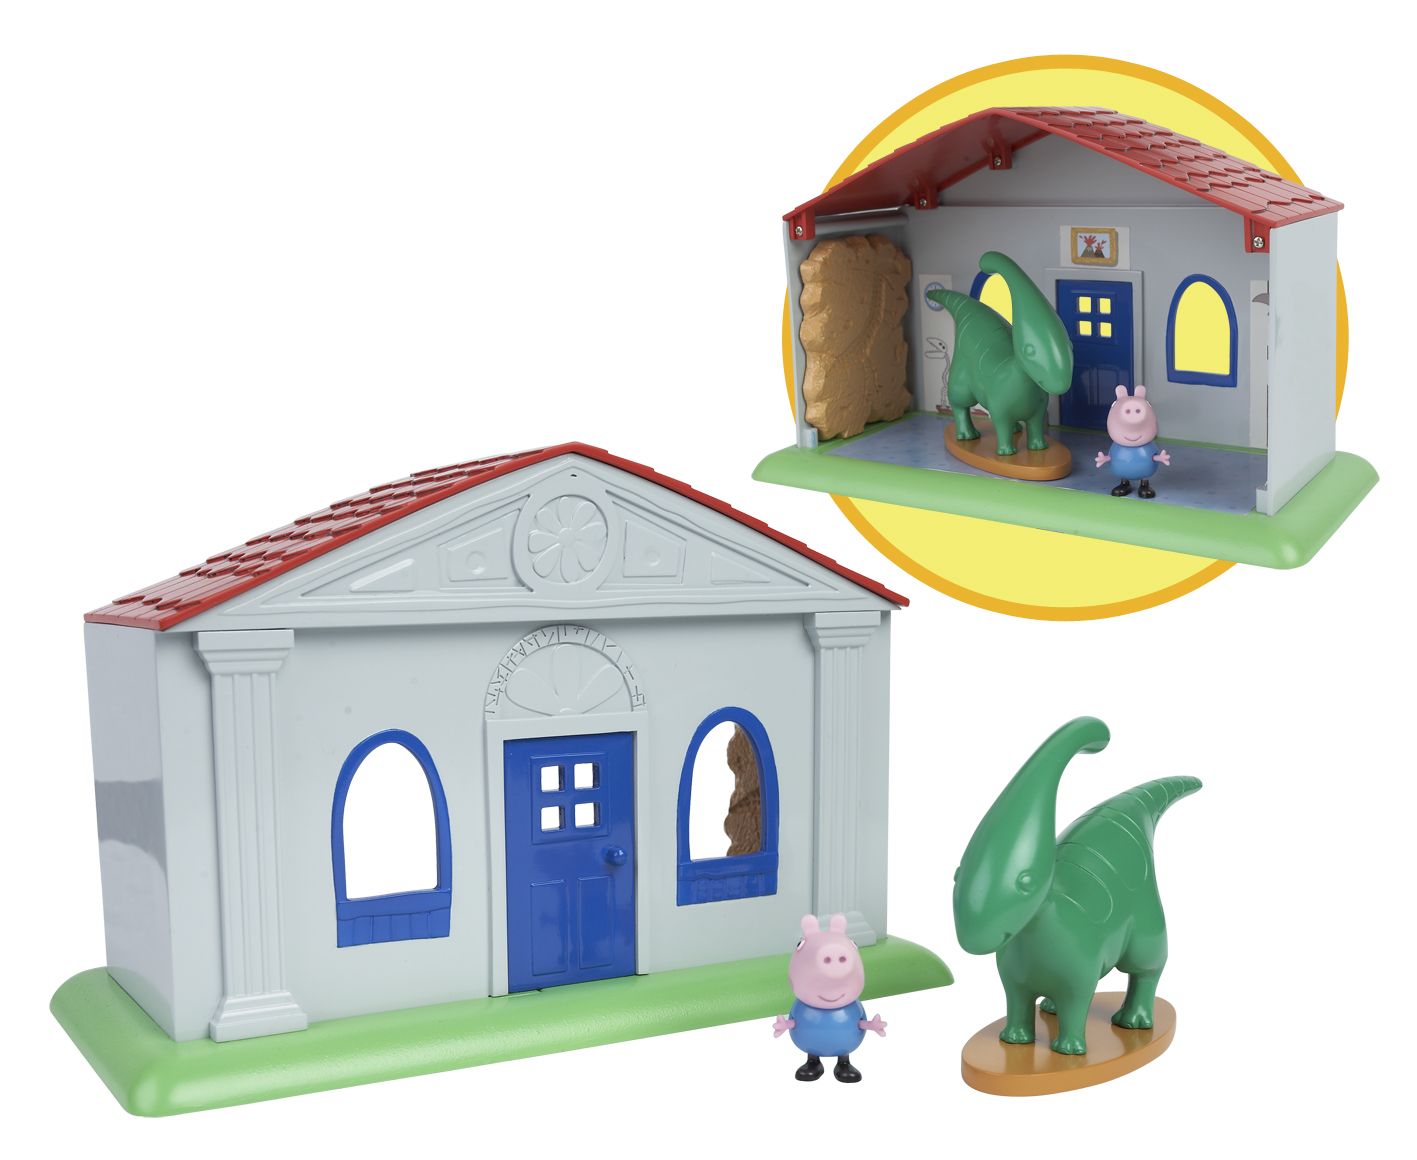 s Funtime Playset - Museum